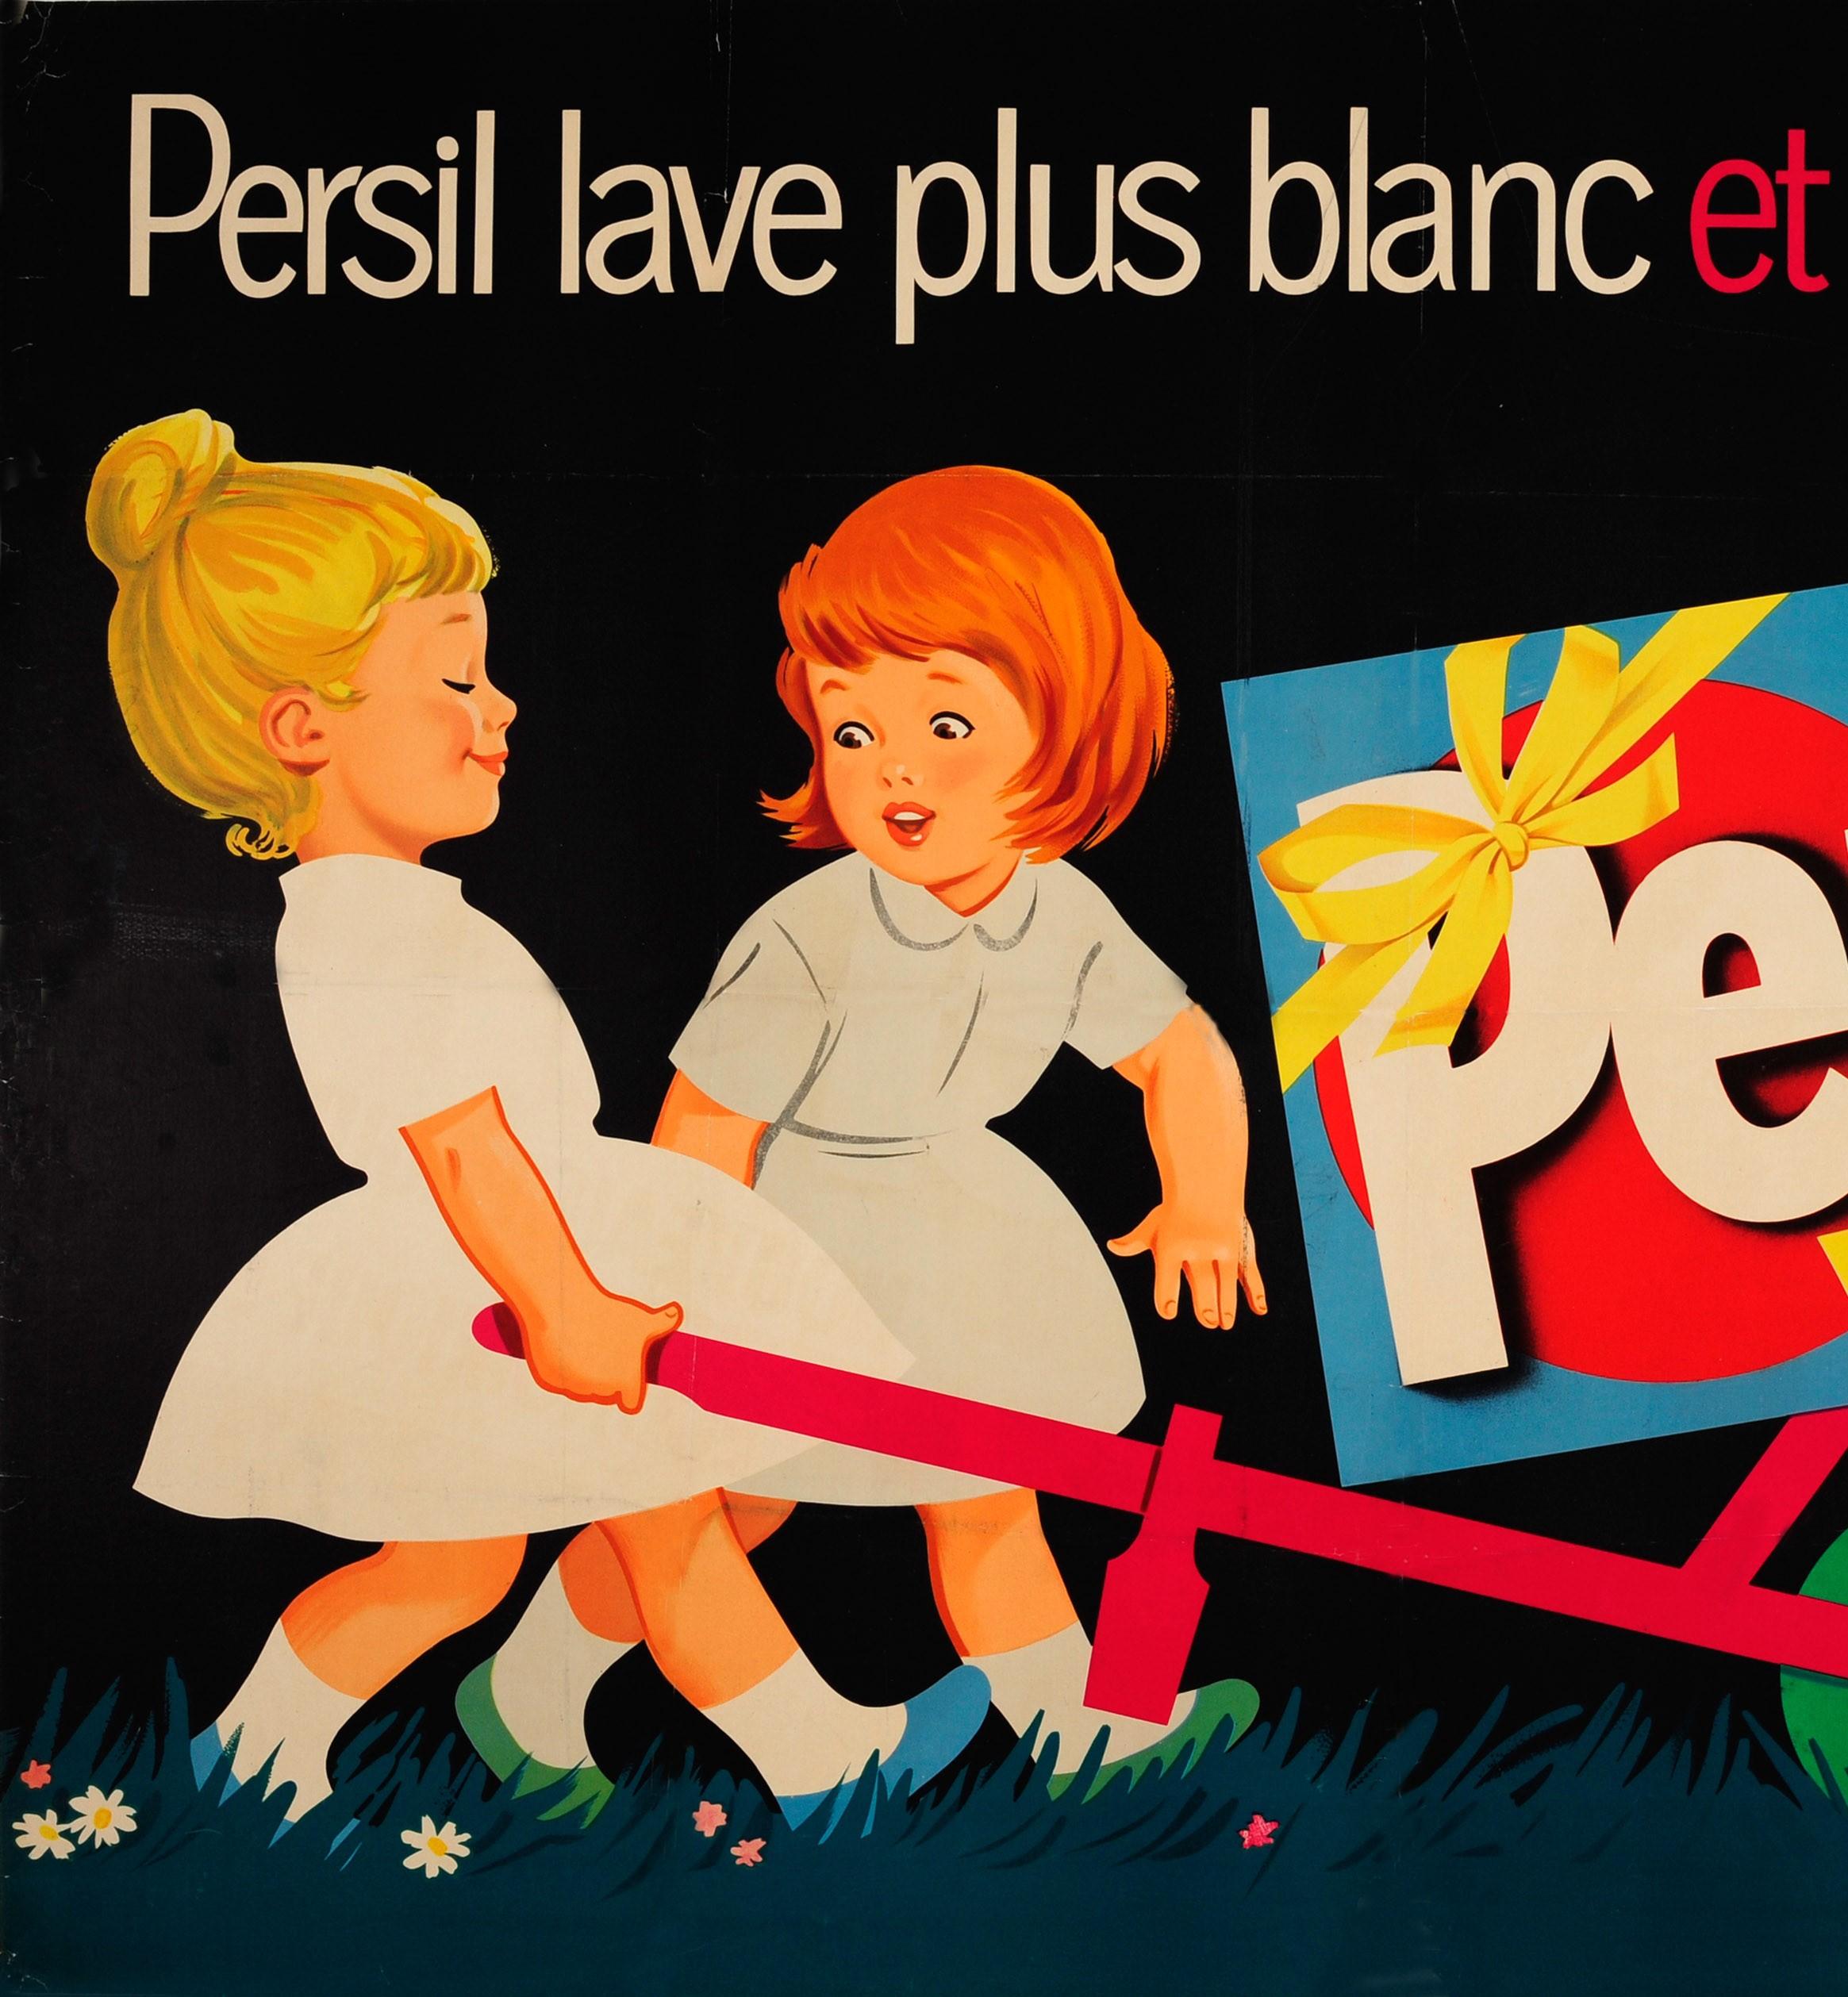 Original vintage advertising poster for Persil washing powder featuring a great illustration against a dark background of two young girls in white dresses with one girl pushing a Persil box on wheels through the grass and the other girl admiring her